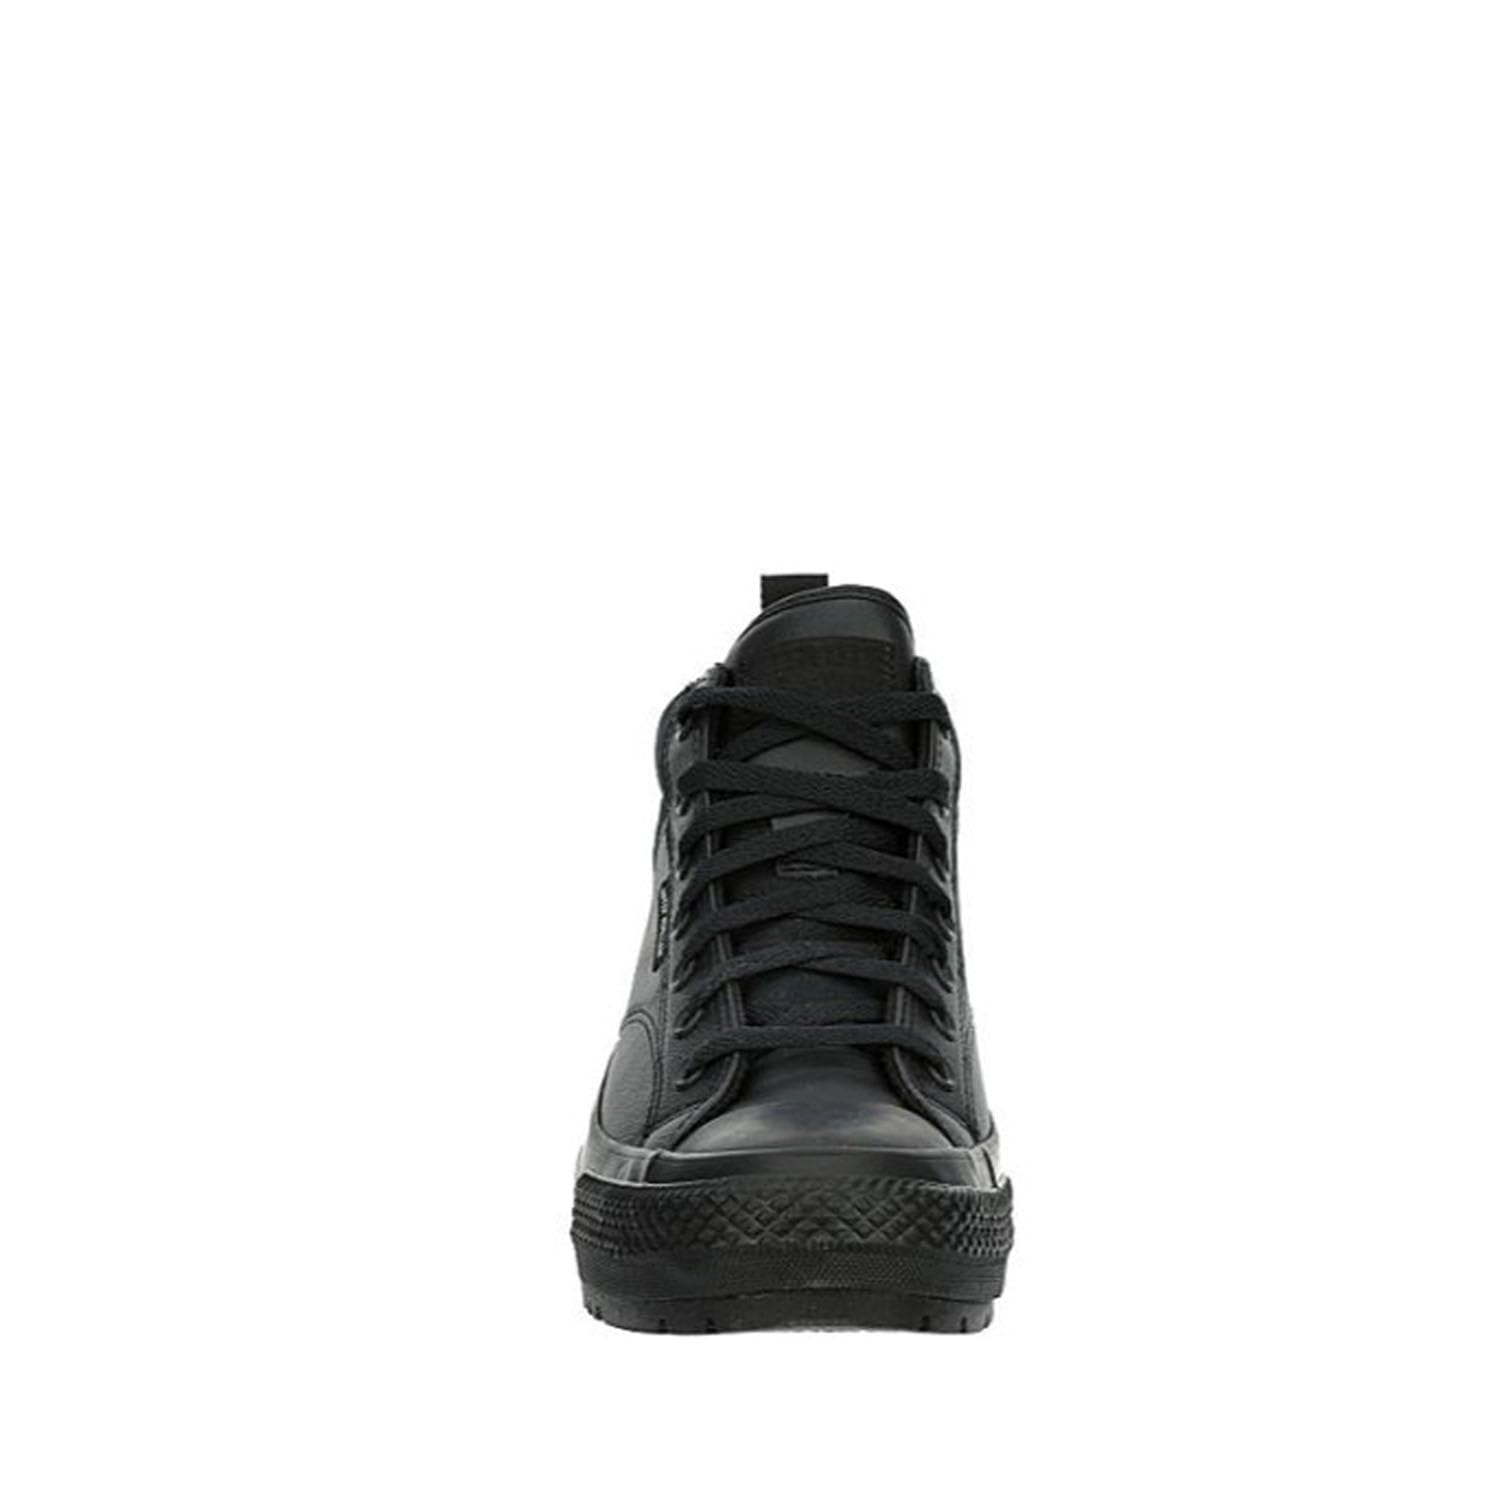 Converse Unisex Chuck Taylor All Star Malden Street Mid High Sneaker Boot Leather - Lace up Closure Style - Black 11.5